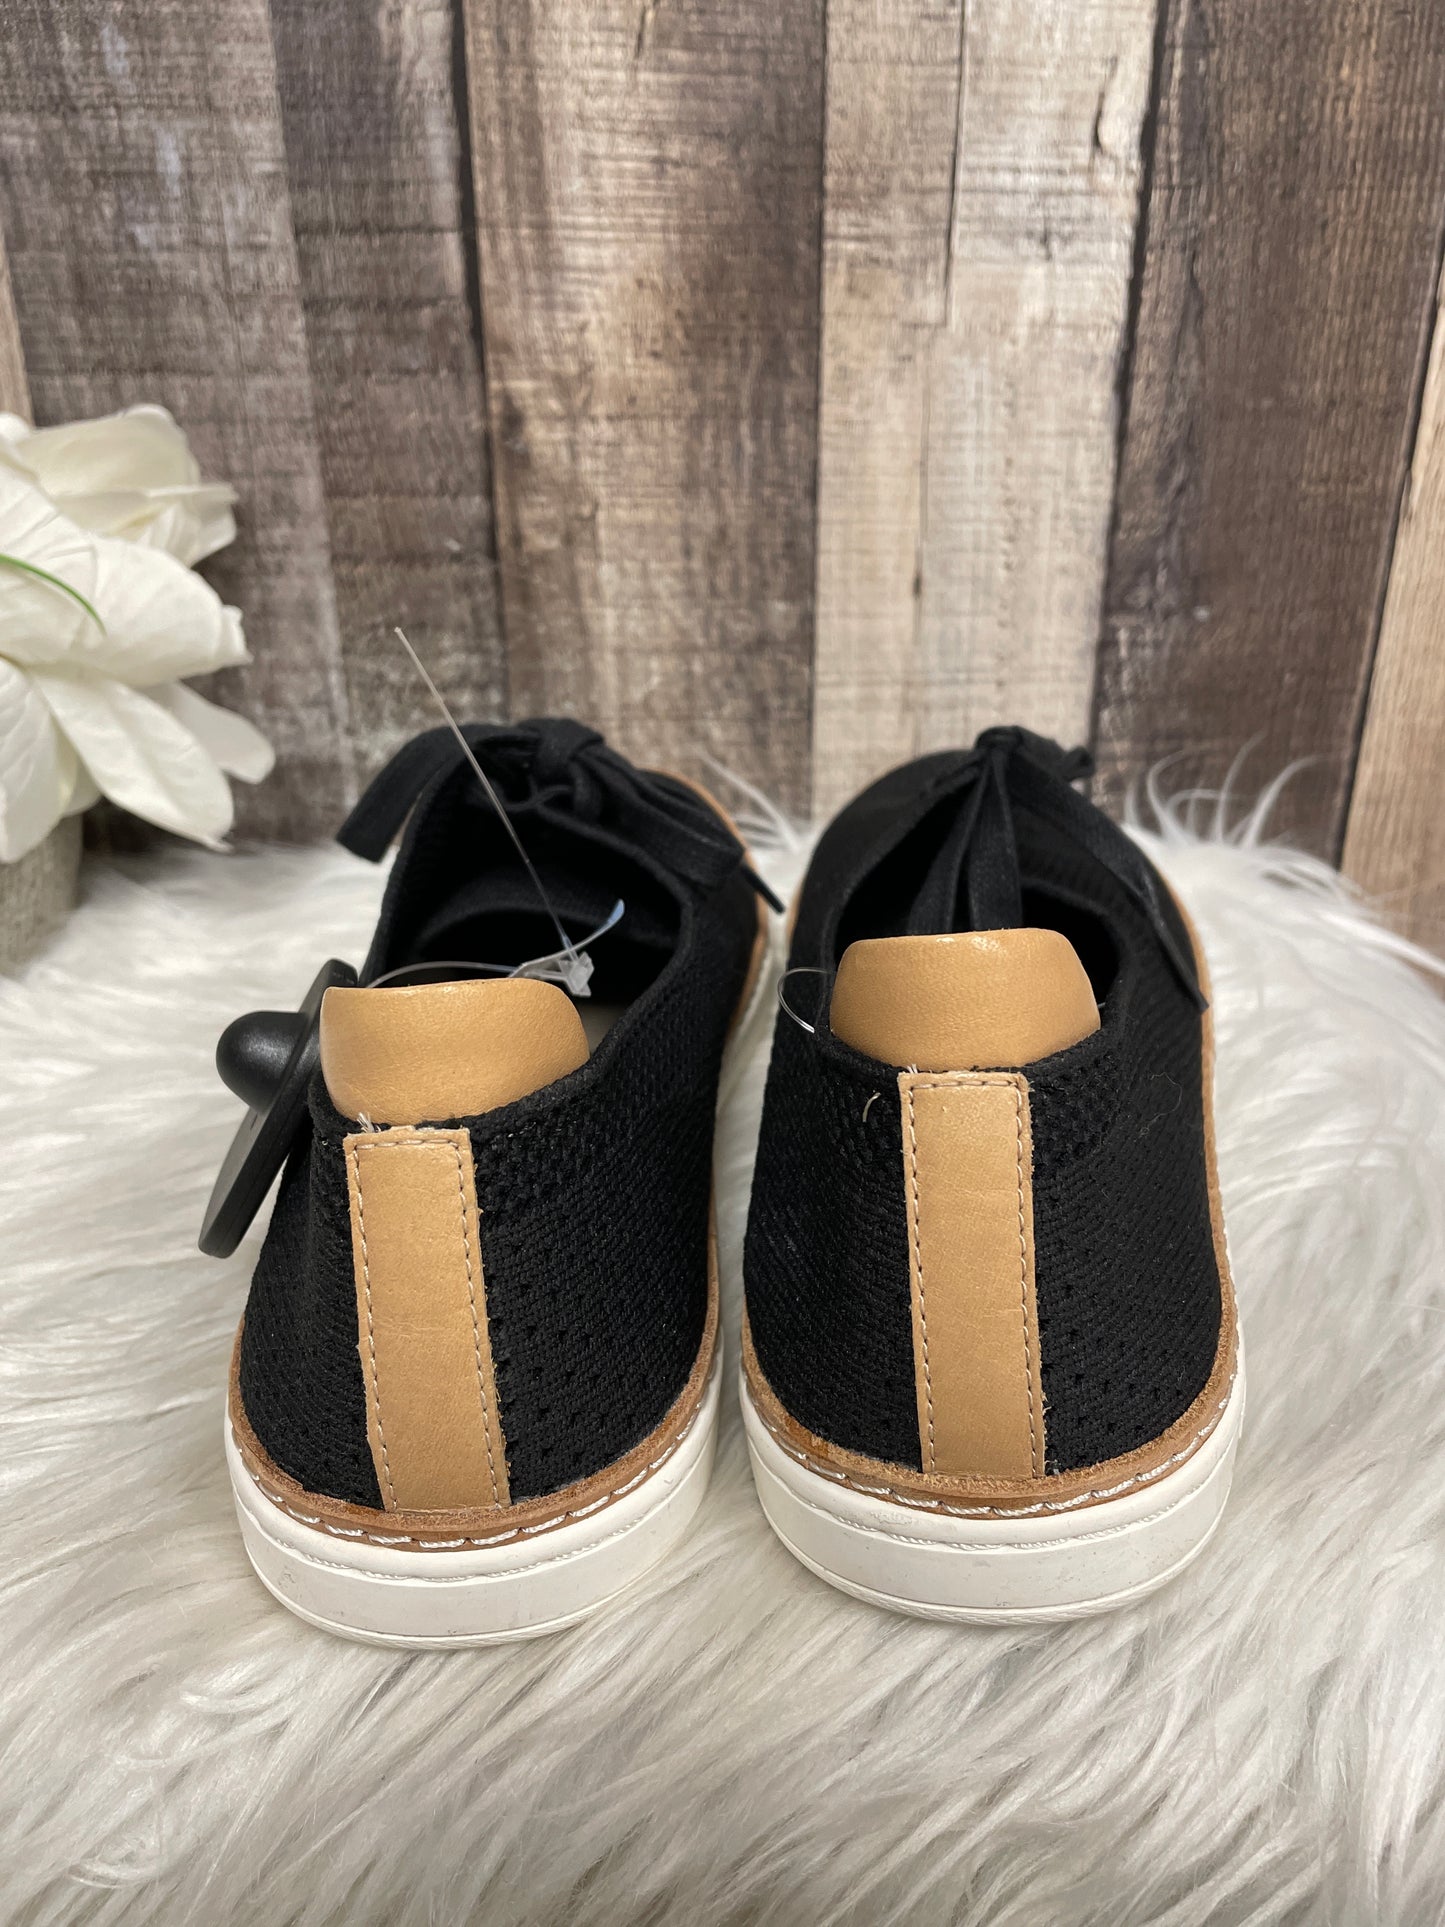 Shoes Sneakers By Ugg  Size: 9.5